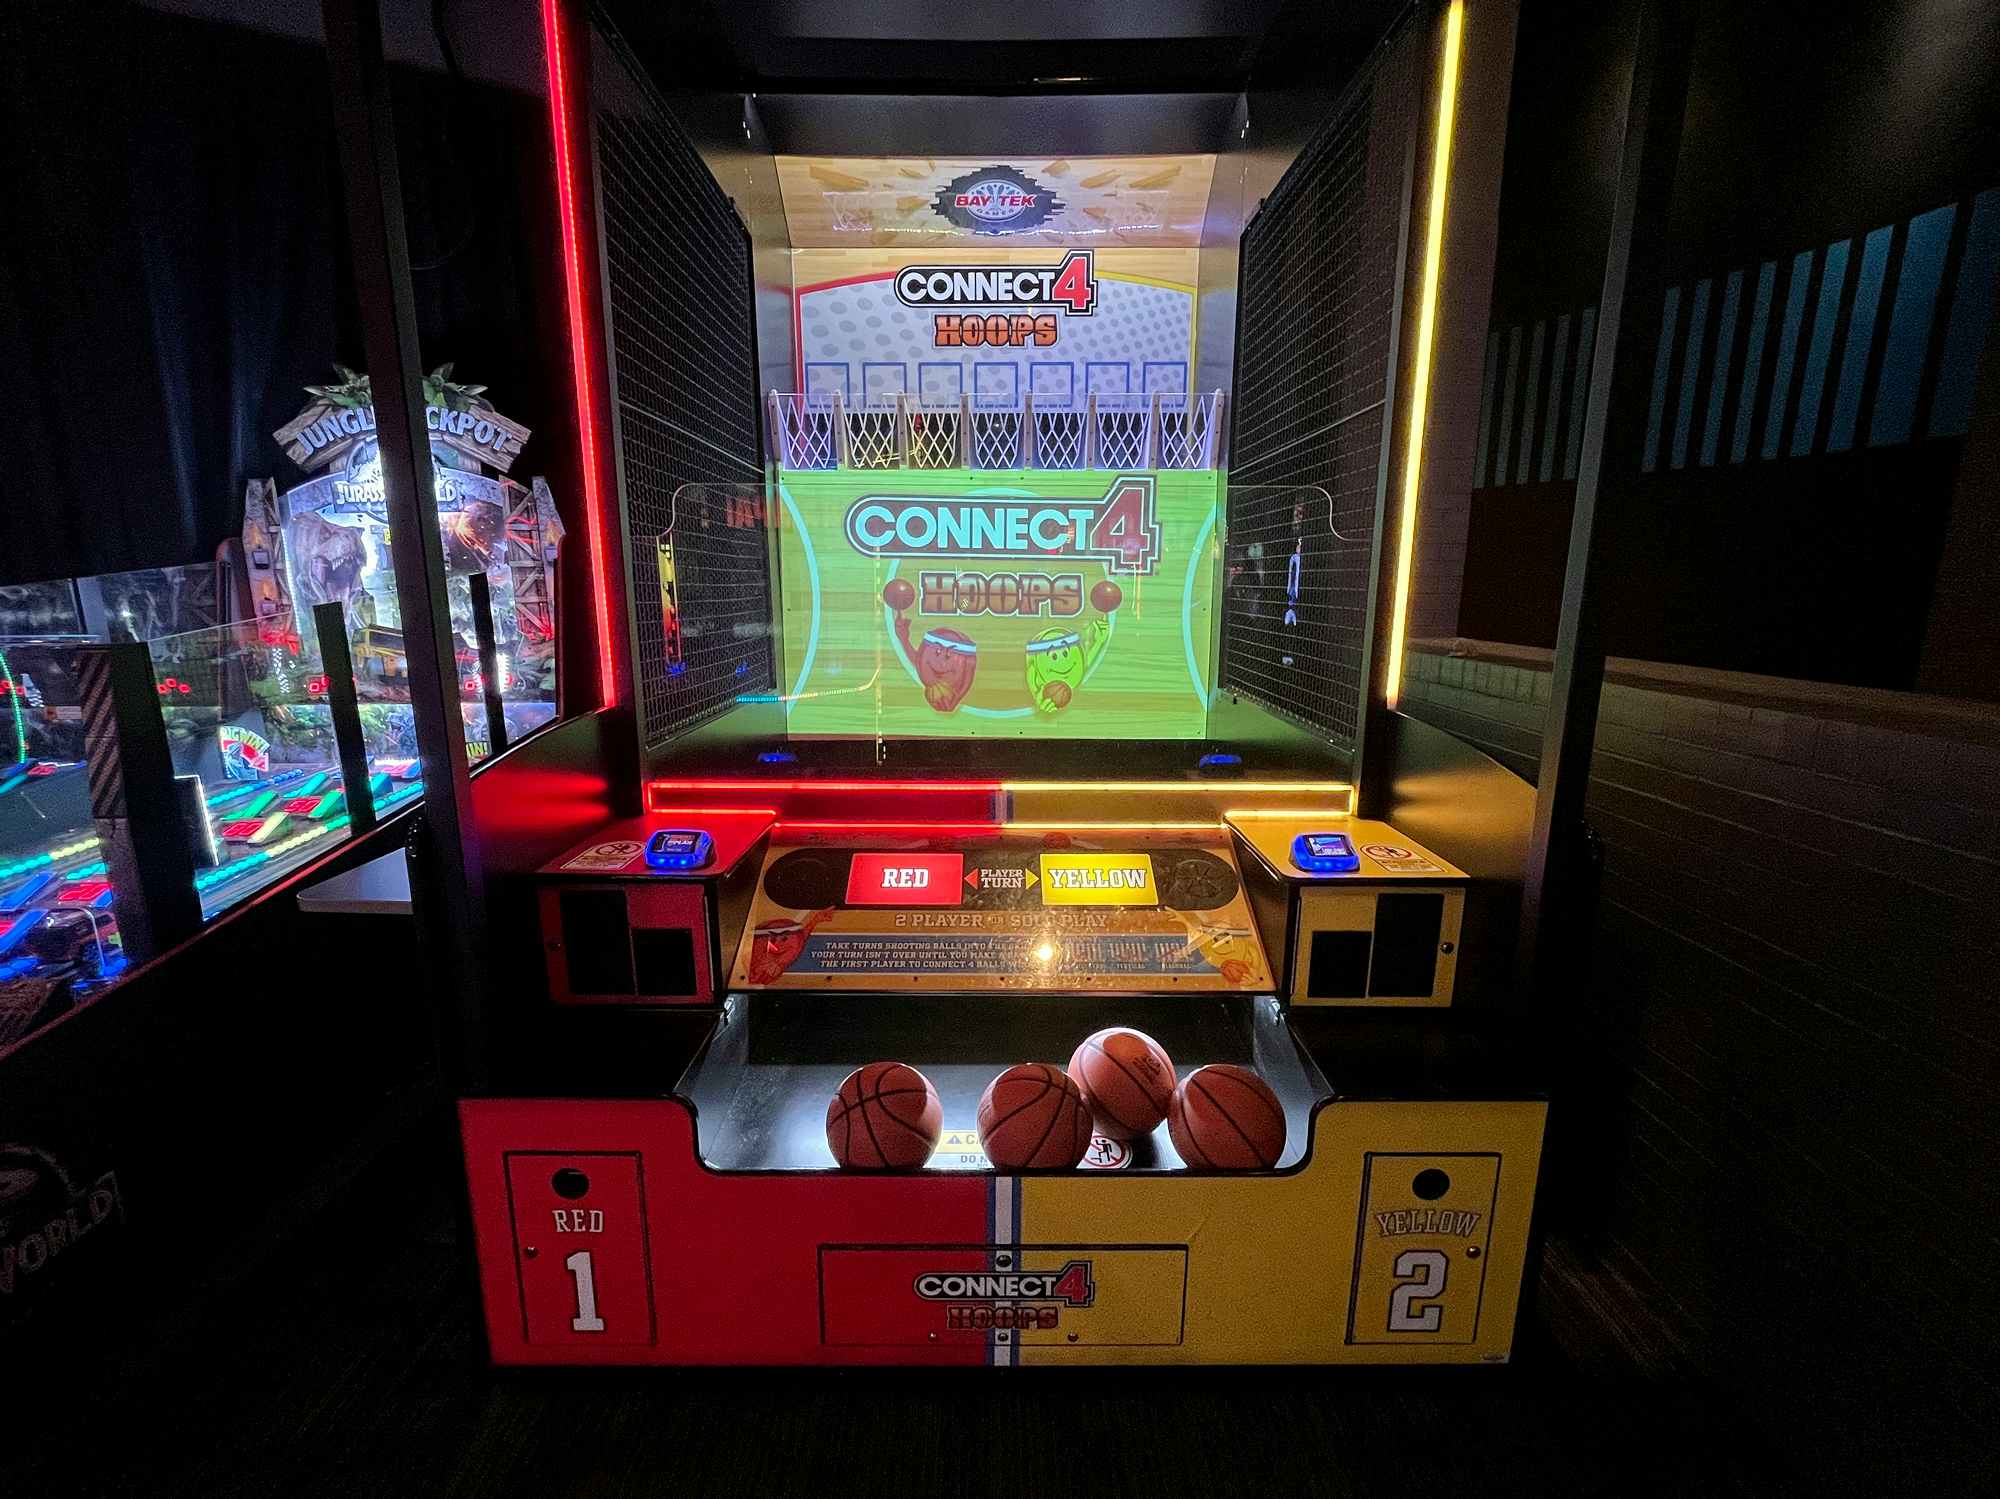 Dave & Buster's Kicks Off Summer Campaign with 5 FREE Games